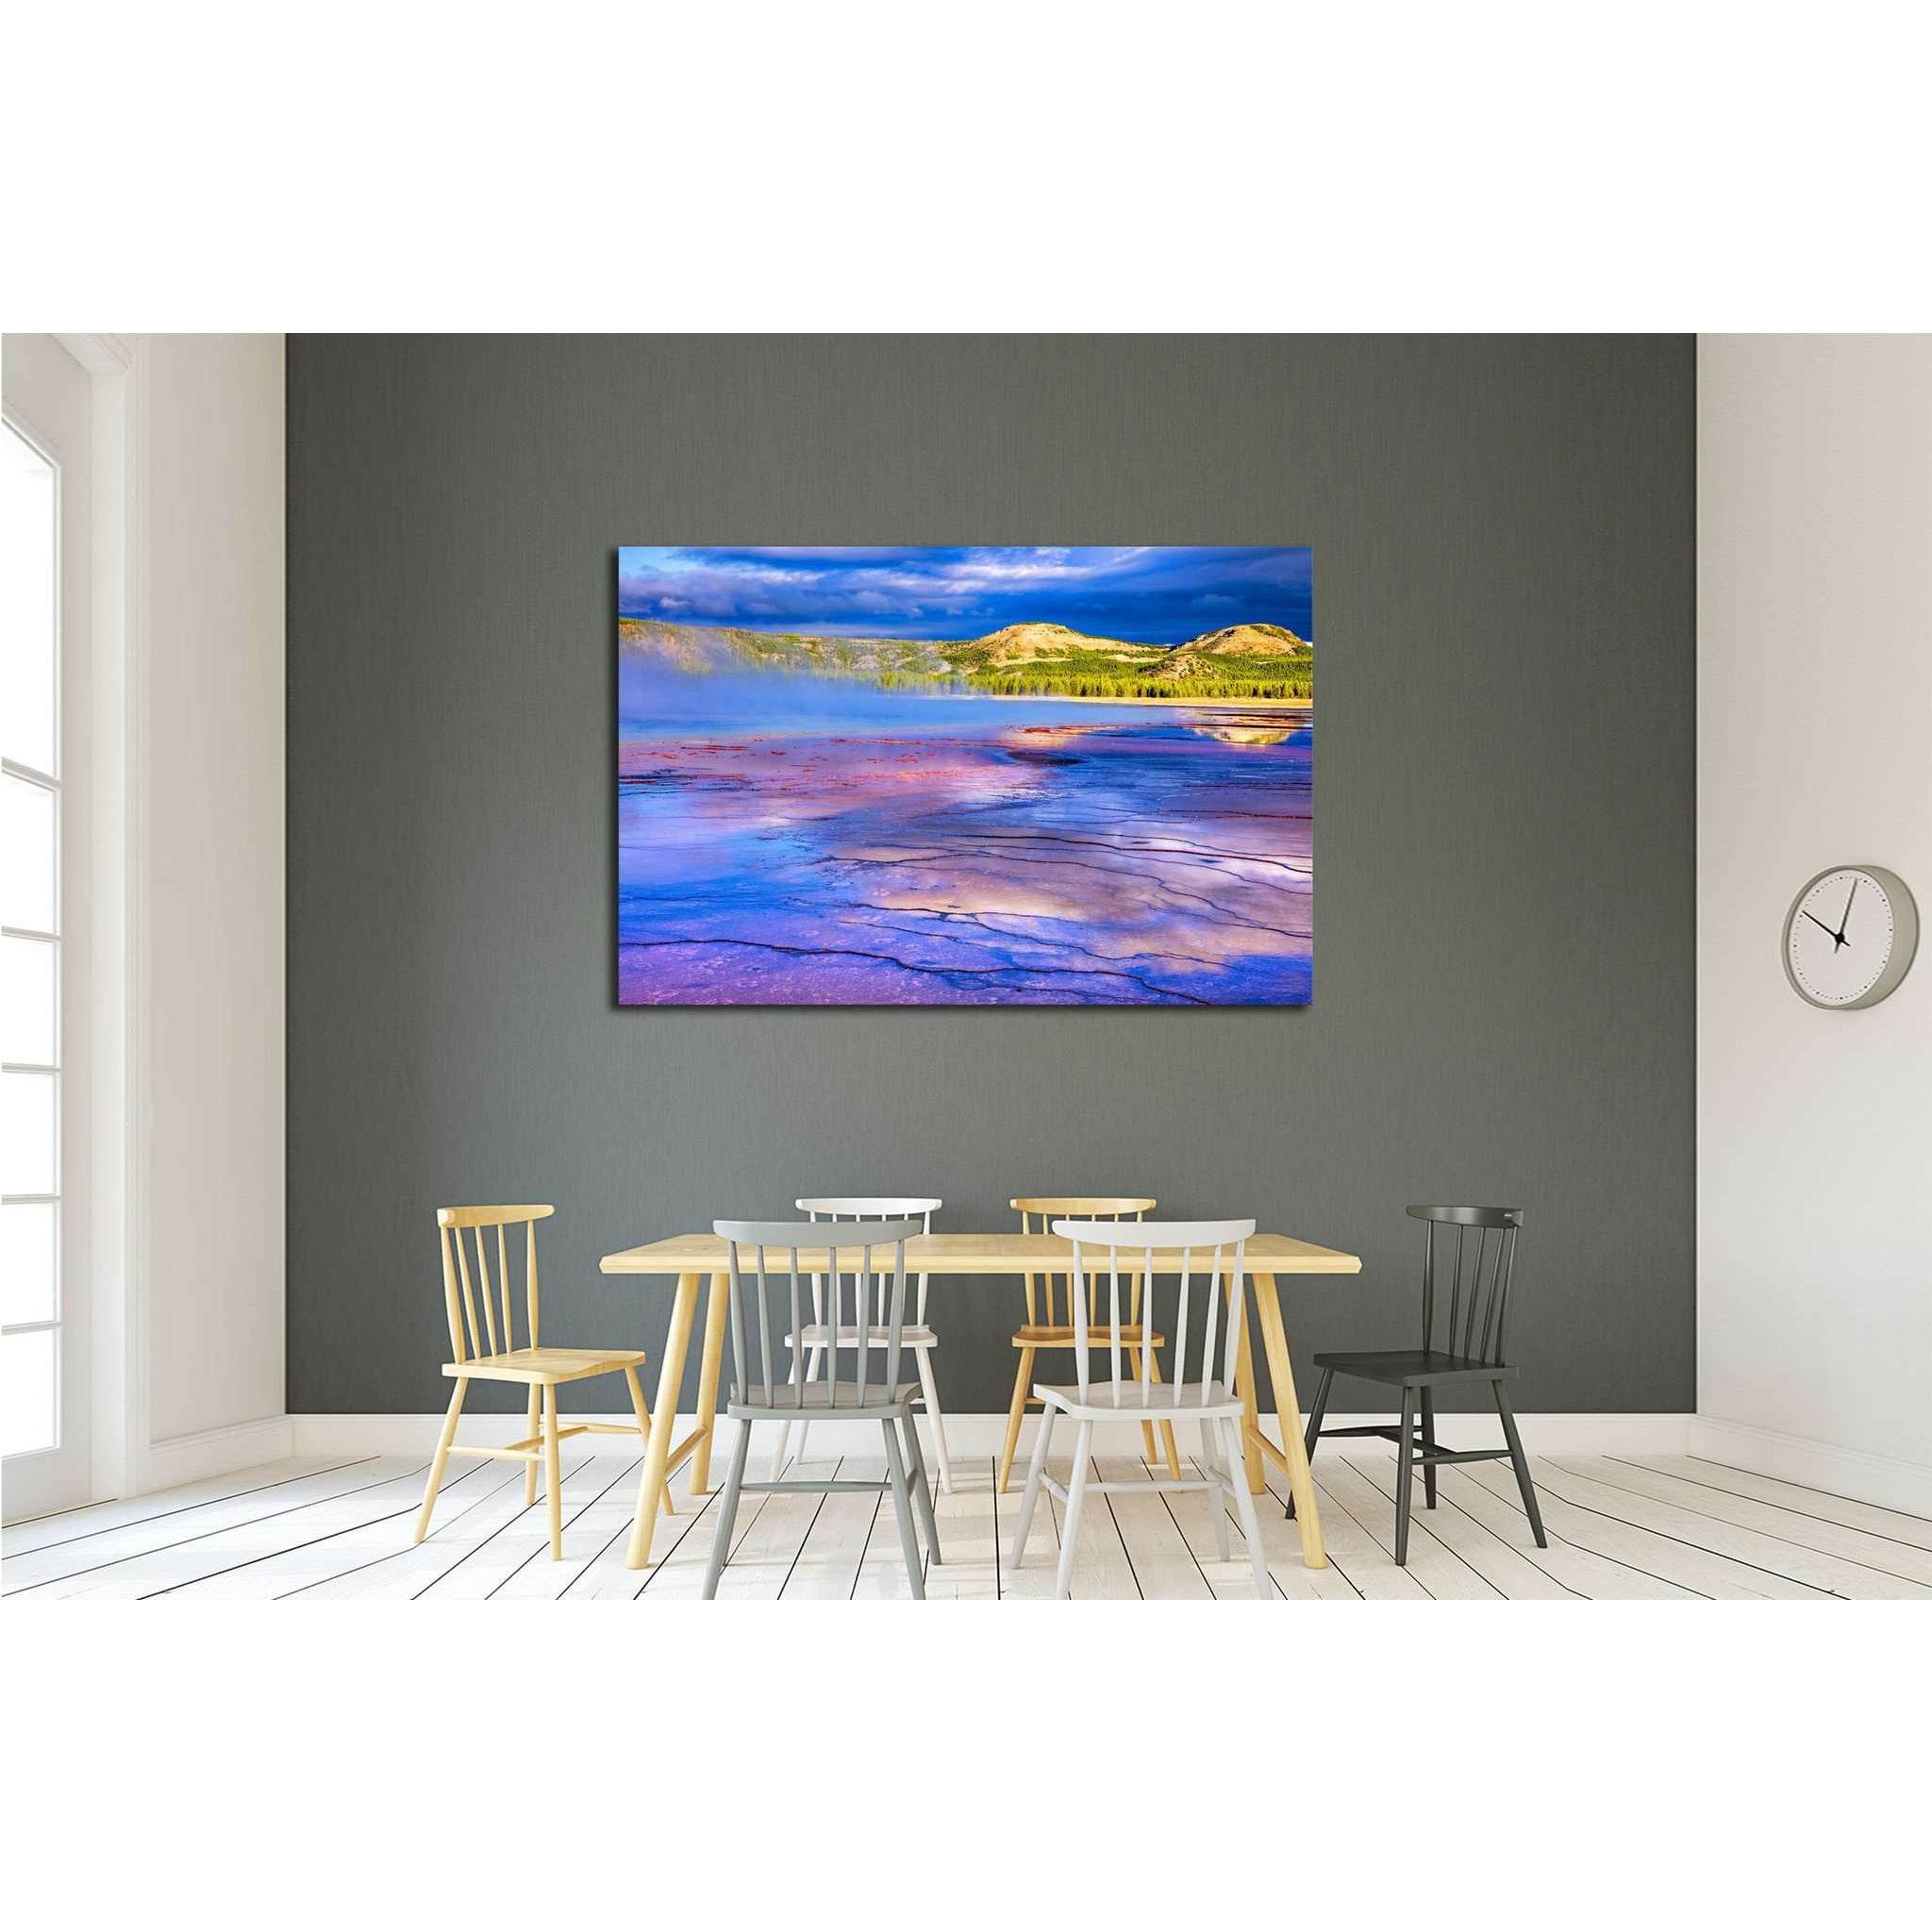 Sunrise at Grand Prismatic Spring in Yellowstone National Park №2001 Ready to Hang Canvas Print